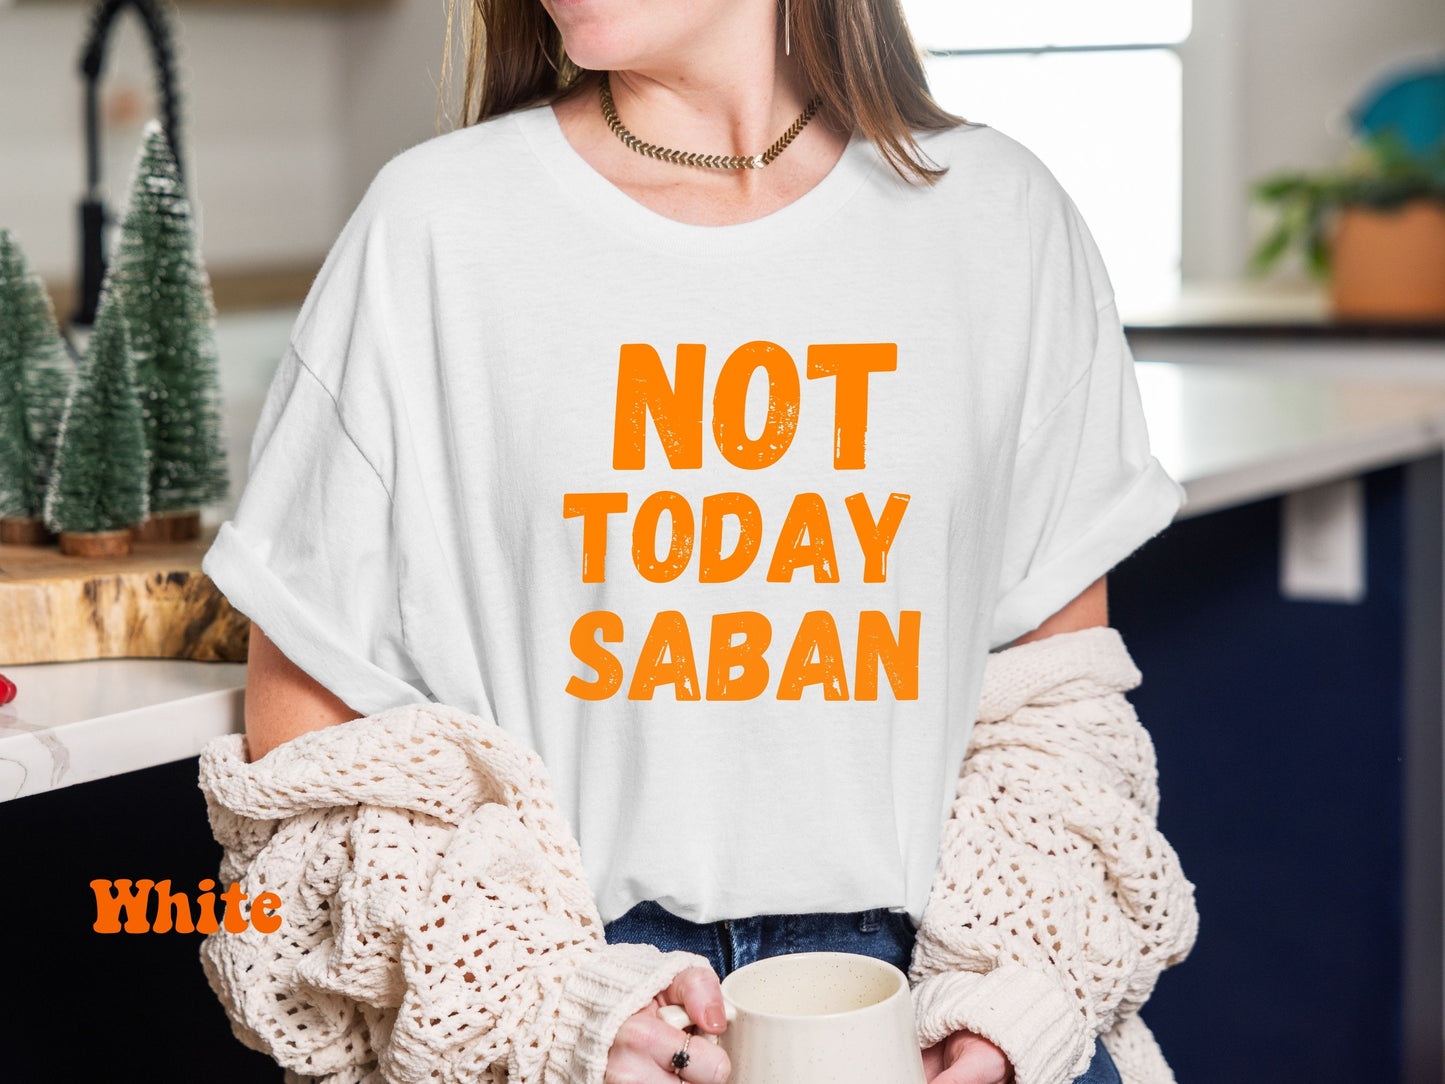 Tennessee Hat,Rocky Top Shirt,Not Today Saban, Funny Football Cap,Tennessee Vols,Cute Tennessee Hat,Tennessee Gameday,Tennessee Game Day,Knoxville,Cute Knoxville,Alabama vs Tennessee,Cute Rocky Top,Tennessee Tailgating